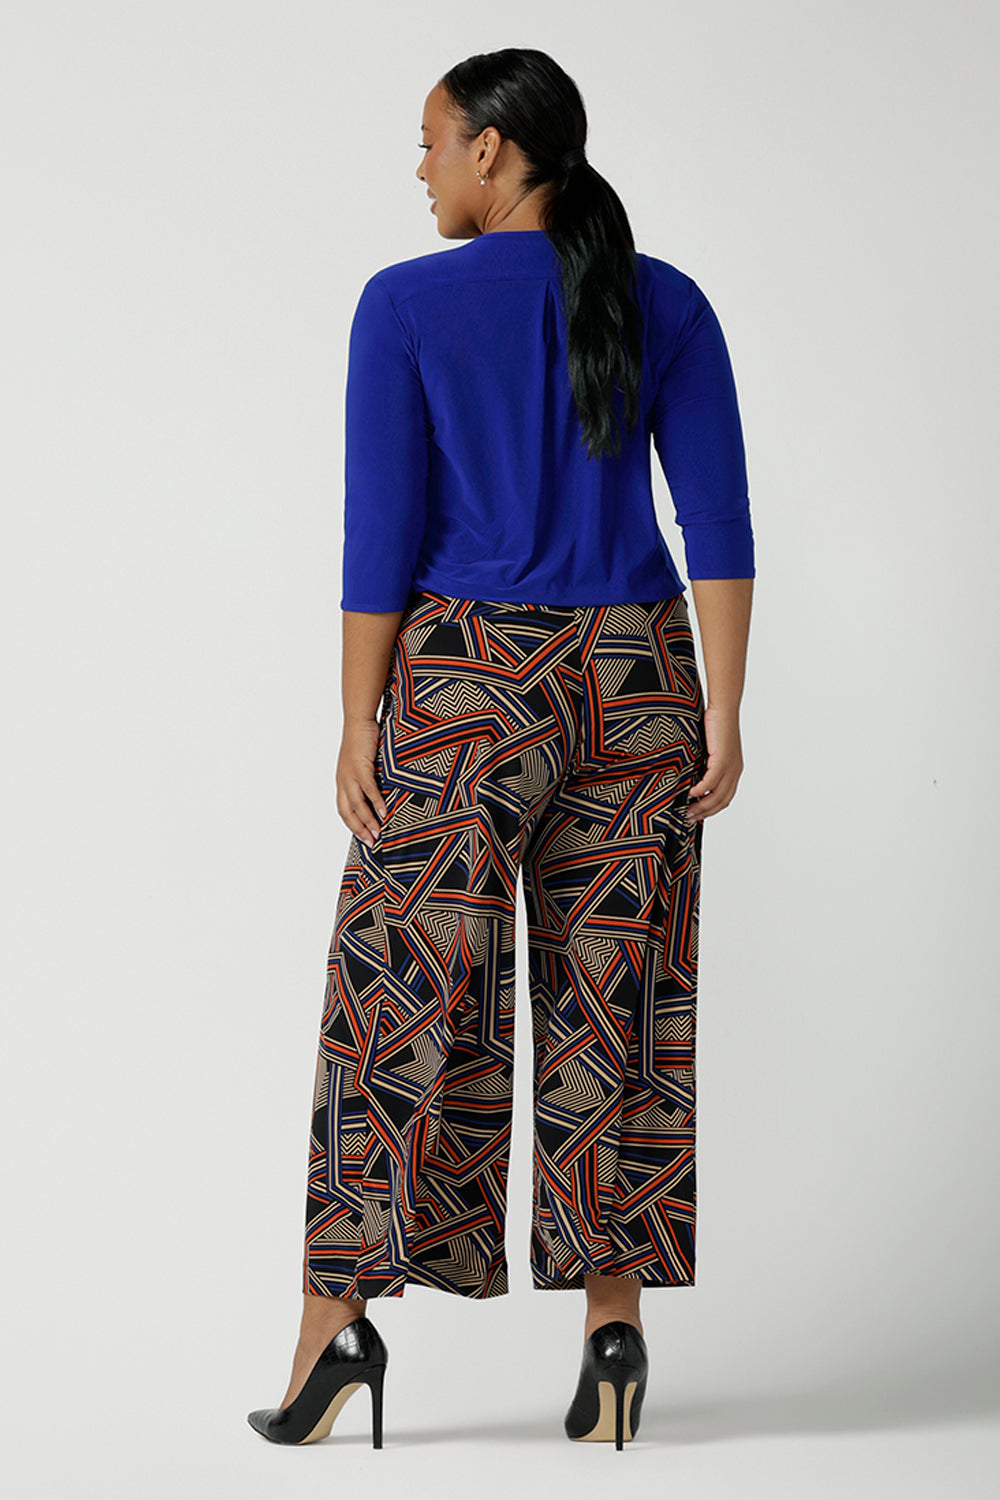 Size 16 Woman wears the Jaime top in Cobalt, a v-neck pleat front top with 3/4 sleeves. Soft Cobalt blue jersey and styled back with black work pants. Styled back with the Dany Culotte in Trixie. Made in Australia for women size 8 - 24